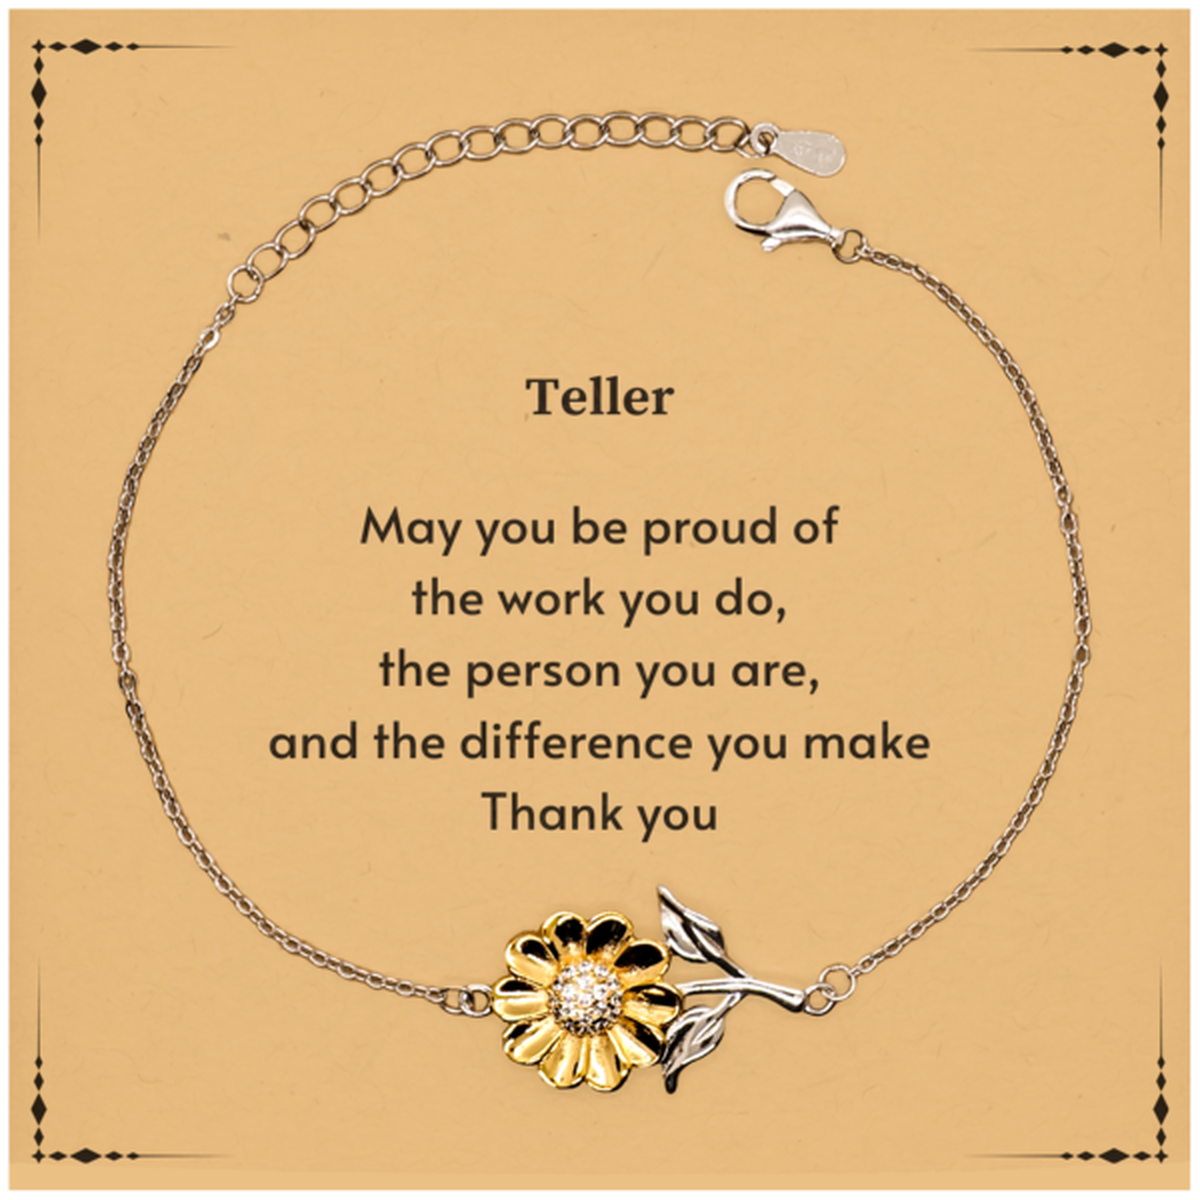 Heartwarming Sunflower Bracelet Retirement Coworkers Gifts for Teller, Teller May You be proud of the work you do, the person you are Gifts for Boss Men Women Friends